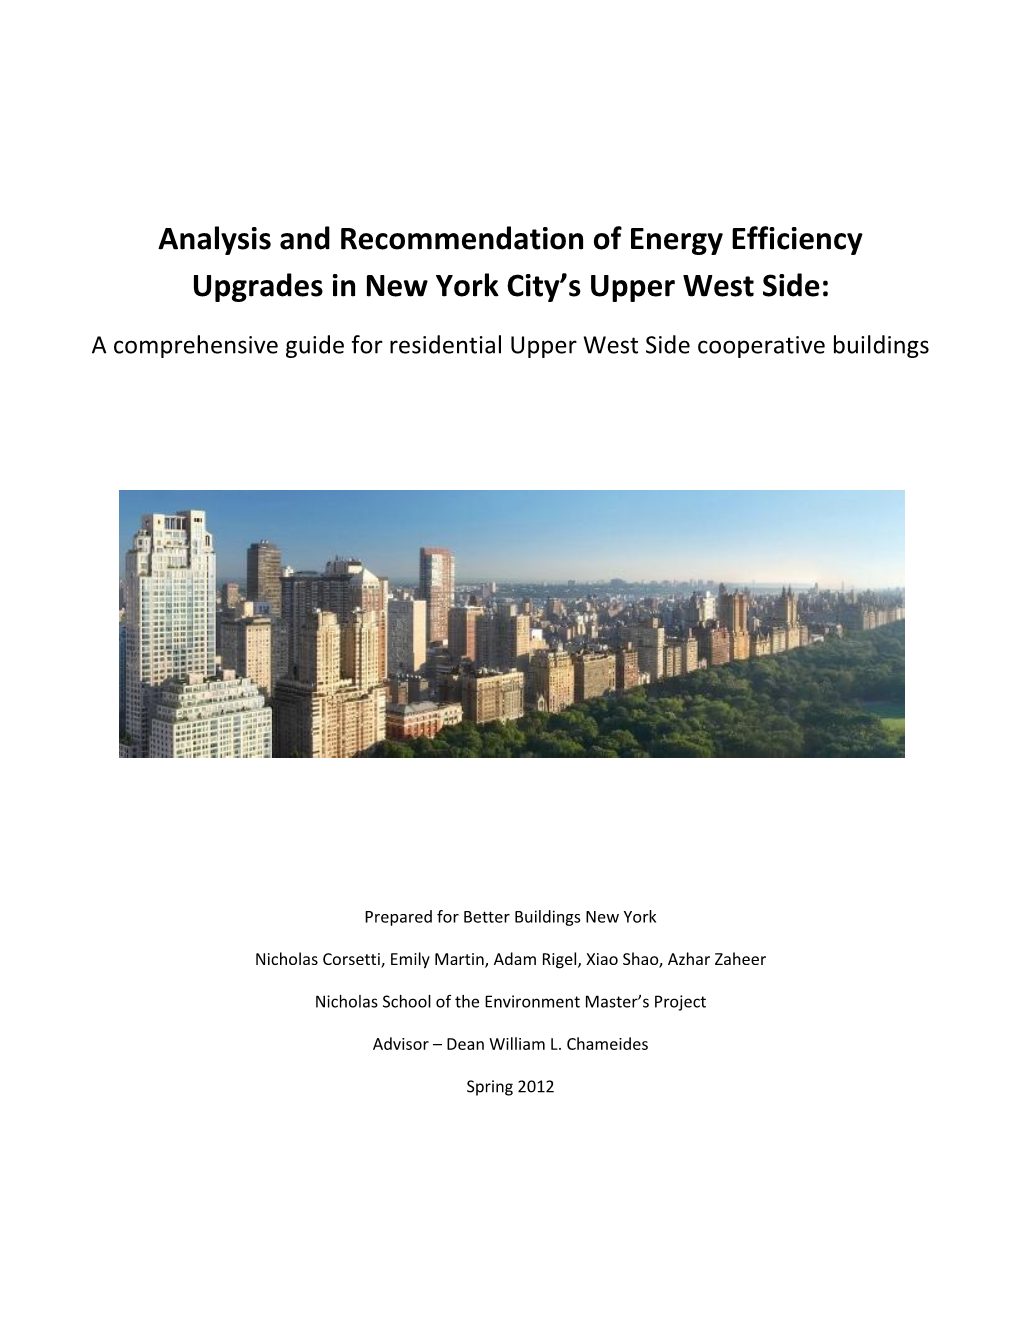 Analysis and Recommendation of Energy Efficiency Upgrades in New York City’S Upper West Side